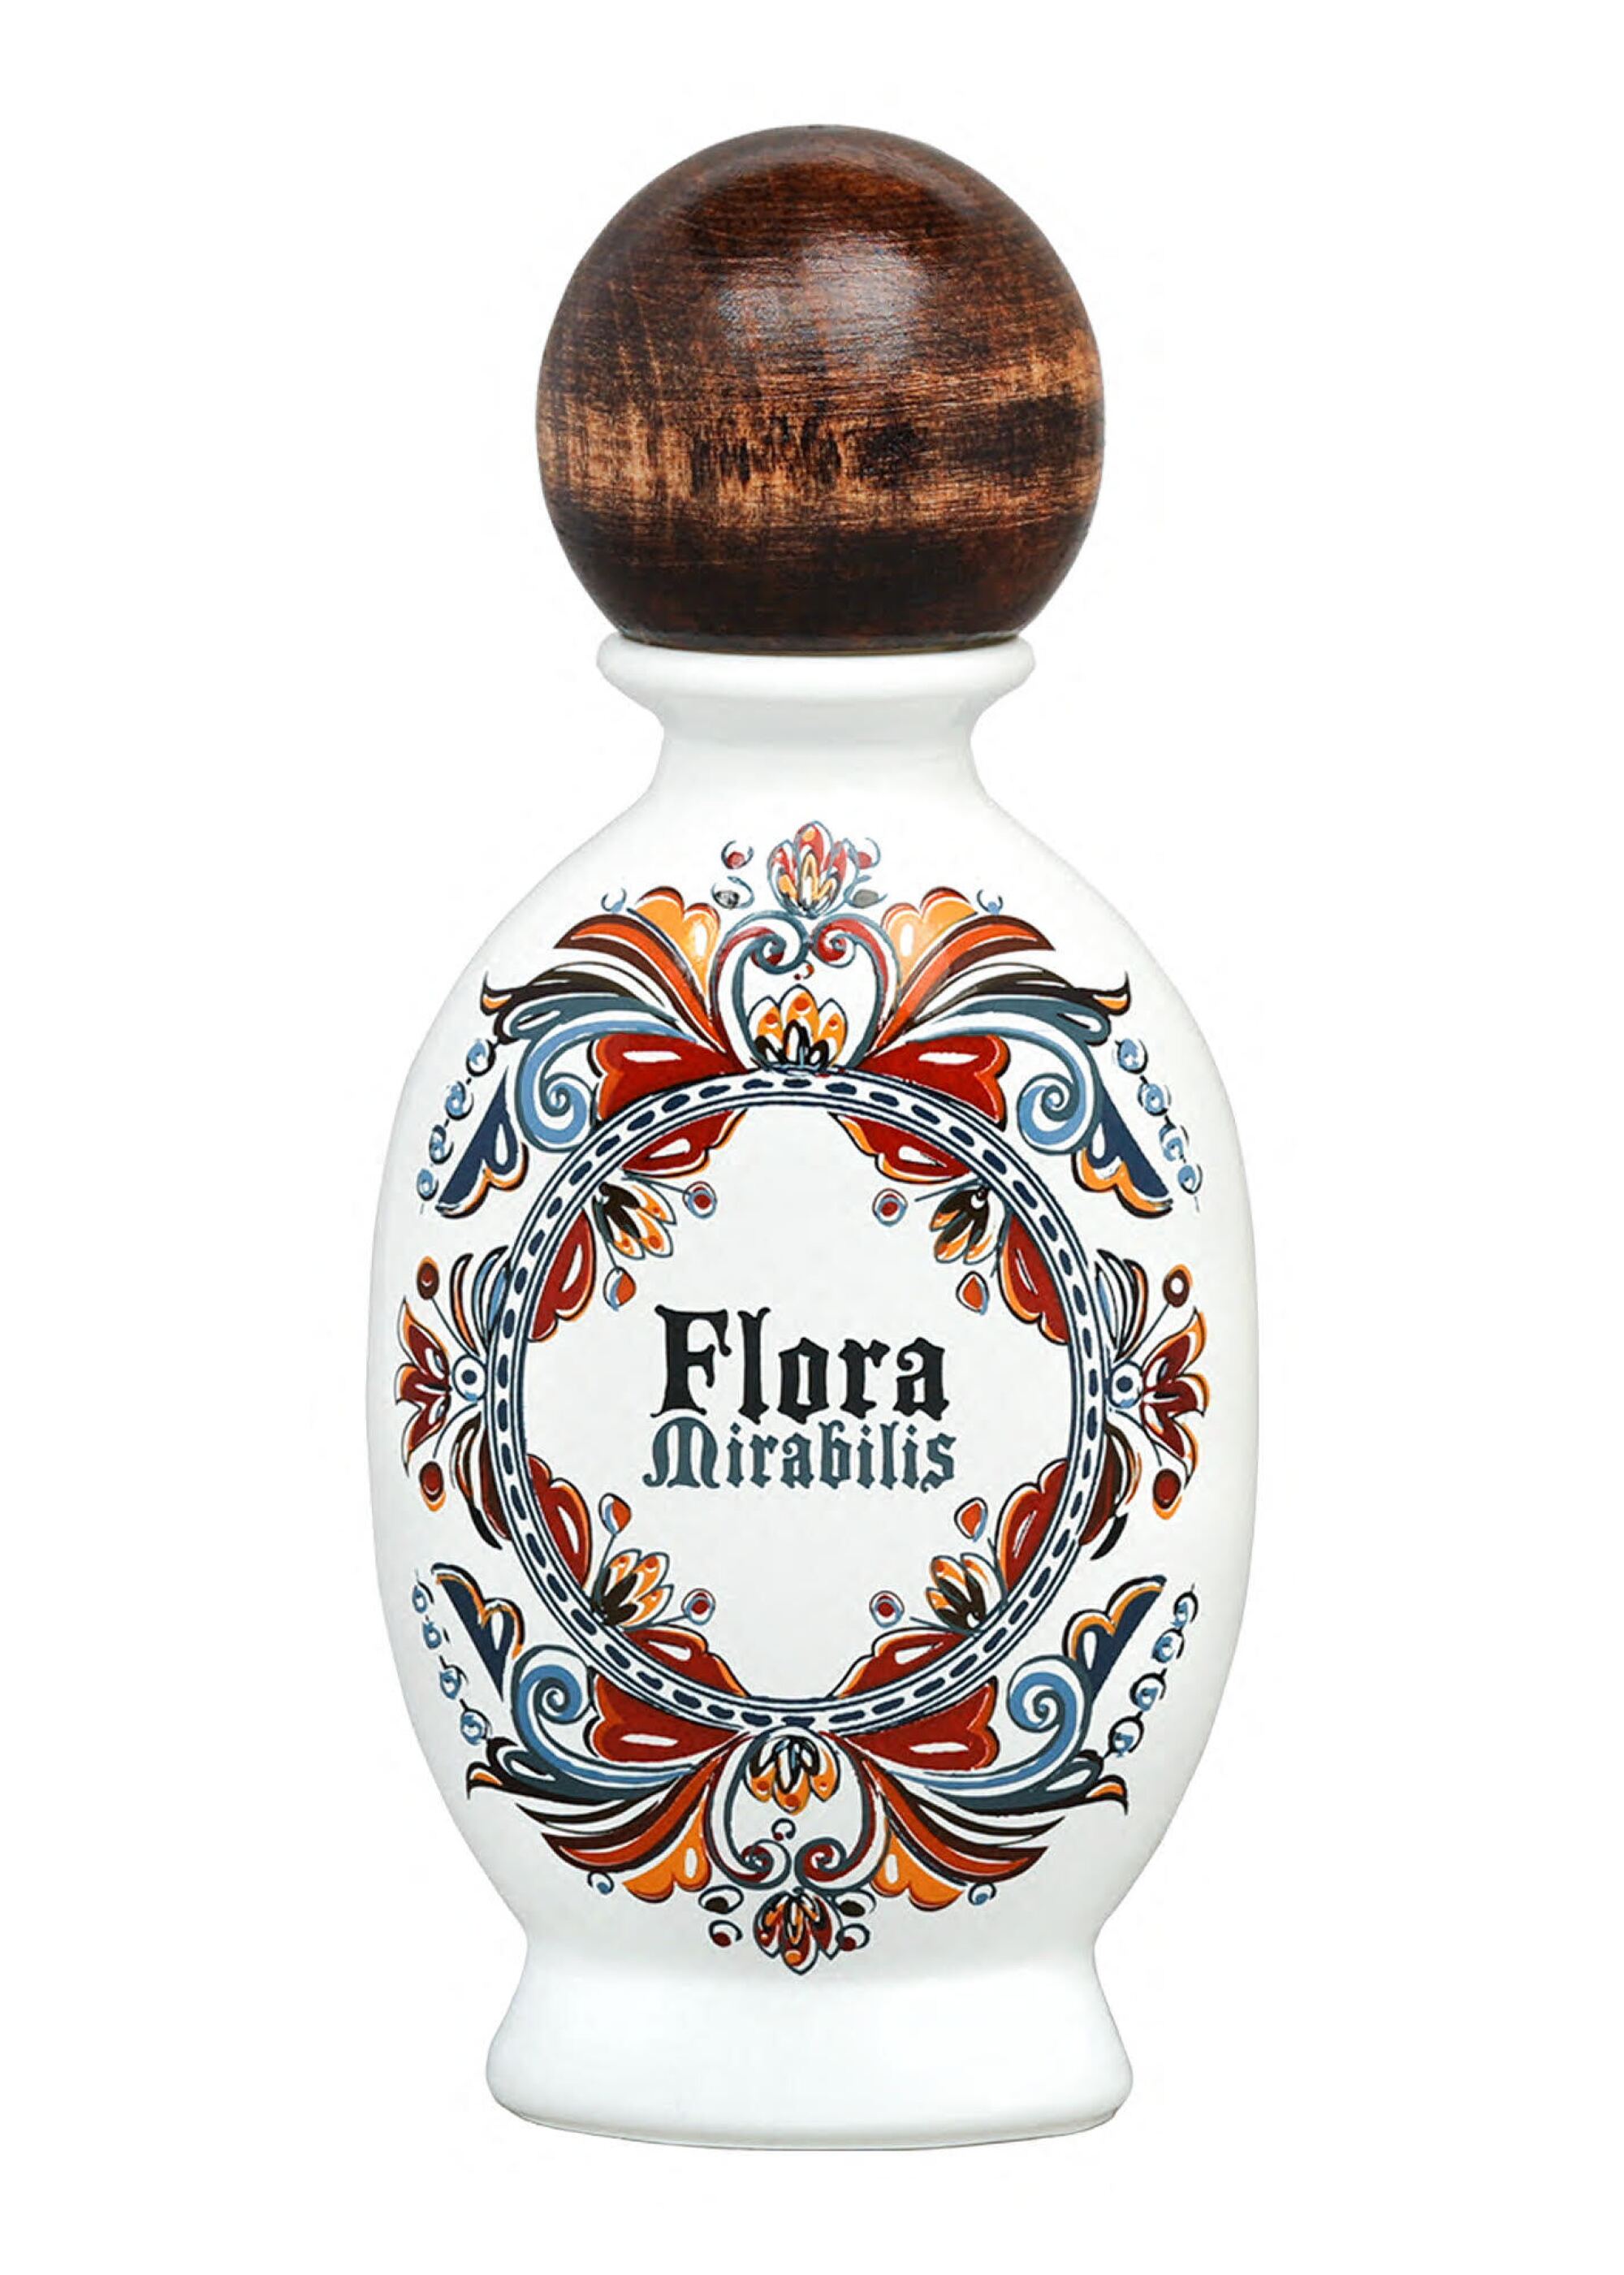 A white bottle with a round wood stopper and a floral design around the words "Flora Mirabilis"